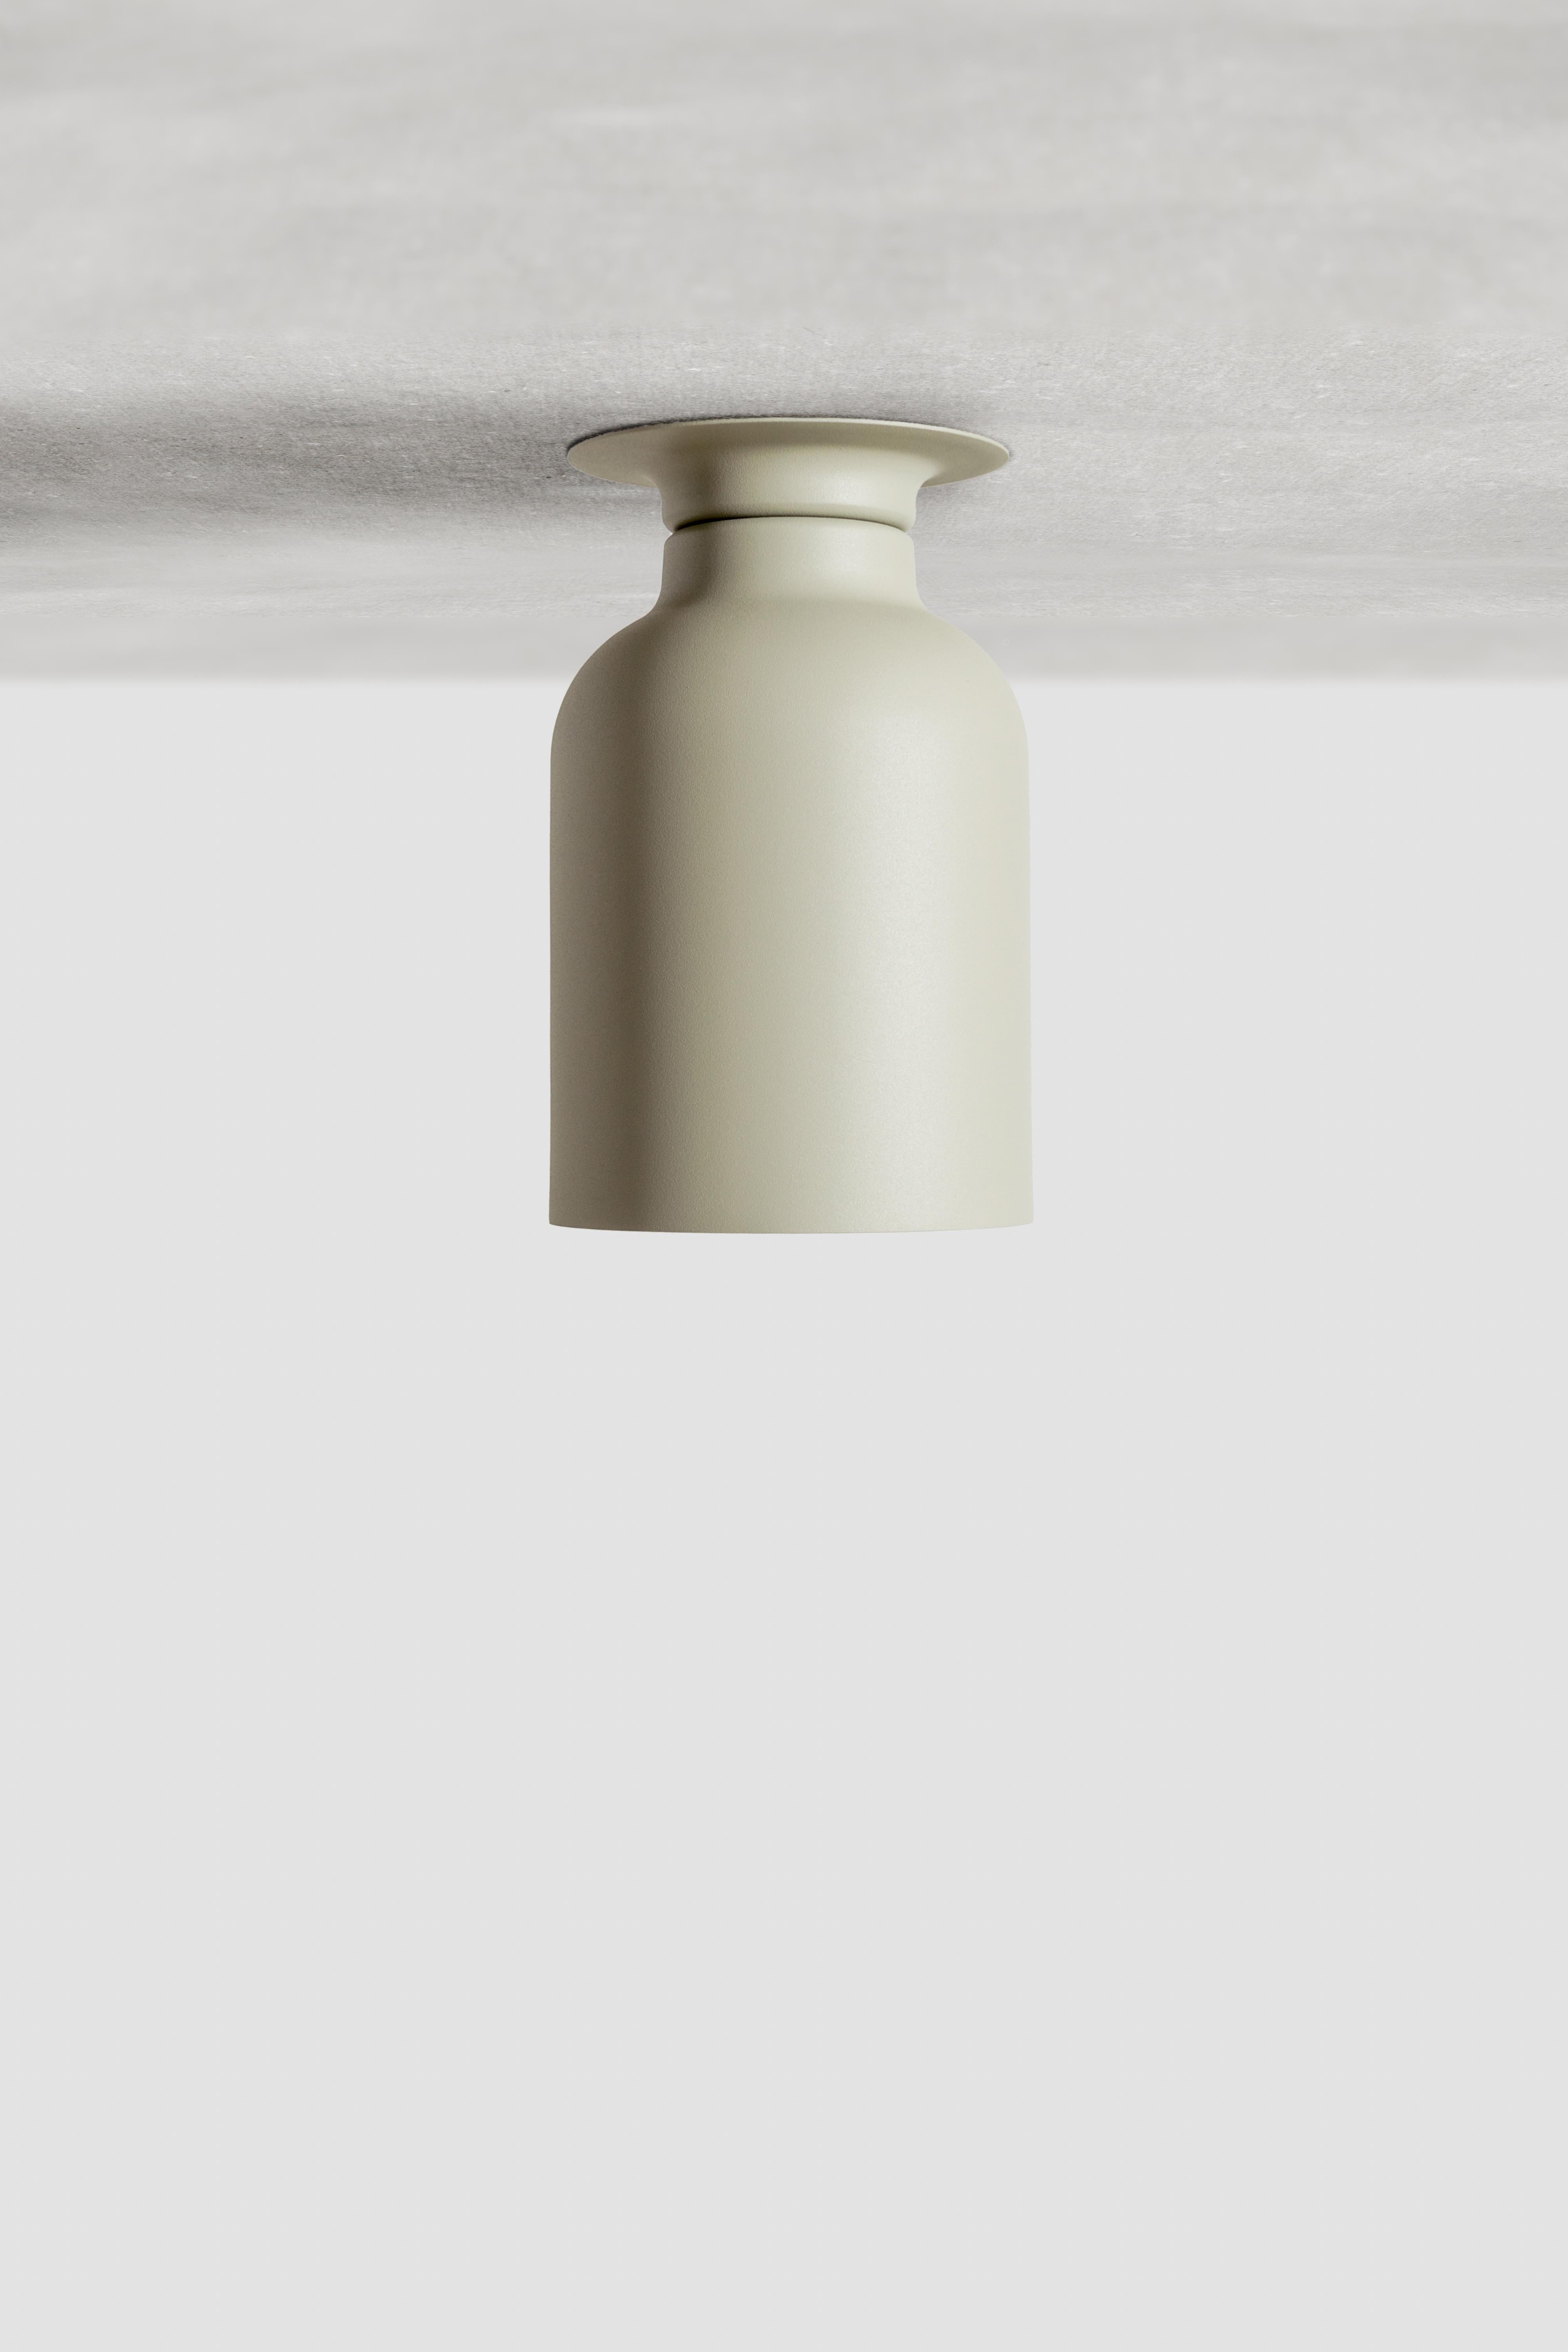 SPOTLIGHT VOLUMES, ceiling lamp / wall lamp
Design: Lukas Peet, Editor: ANDLight

UL Listed

Model shown: C

Inspired by spotlights, the Spotlight Volumes series is based on four unique shade profiles which combine in various ways. While designed